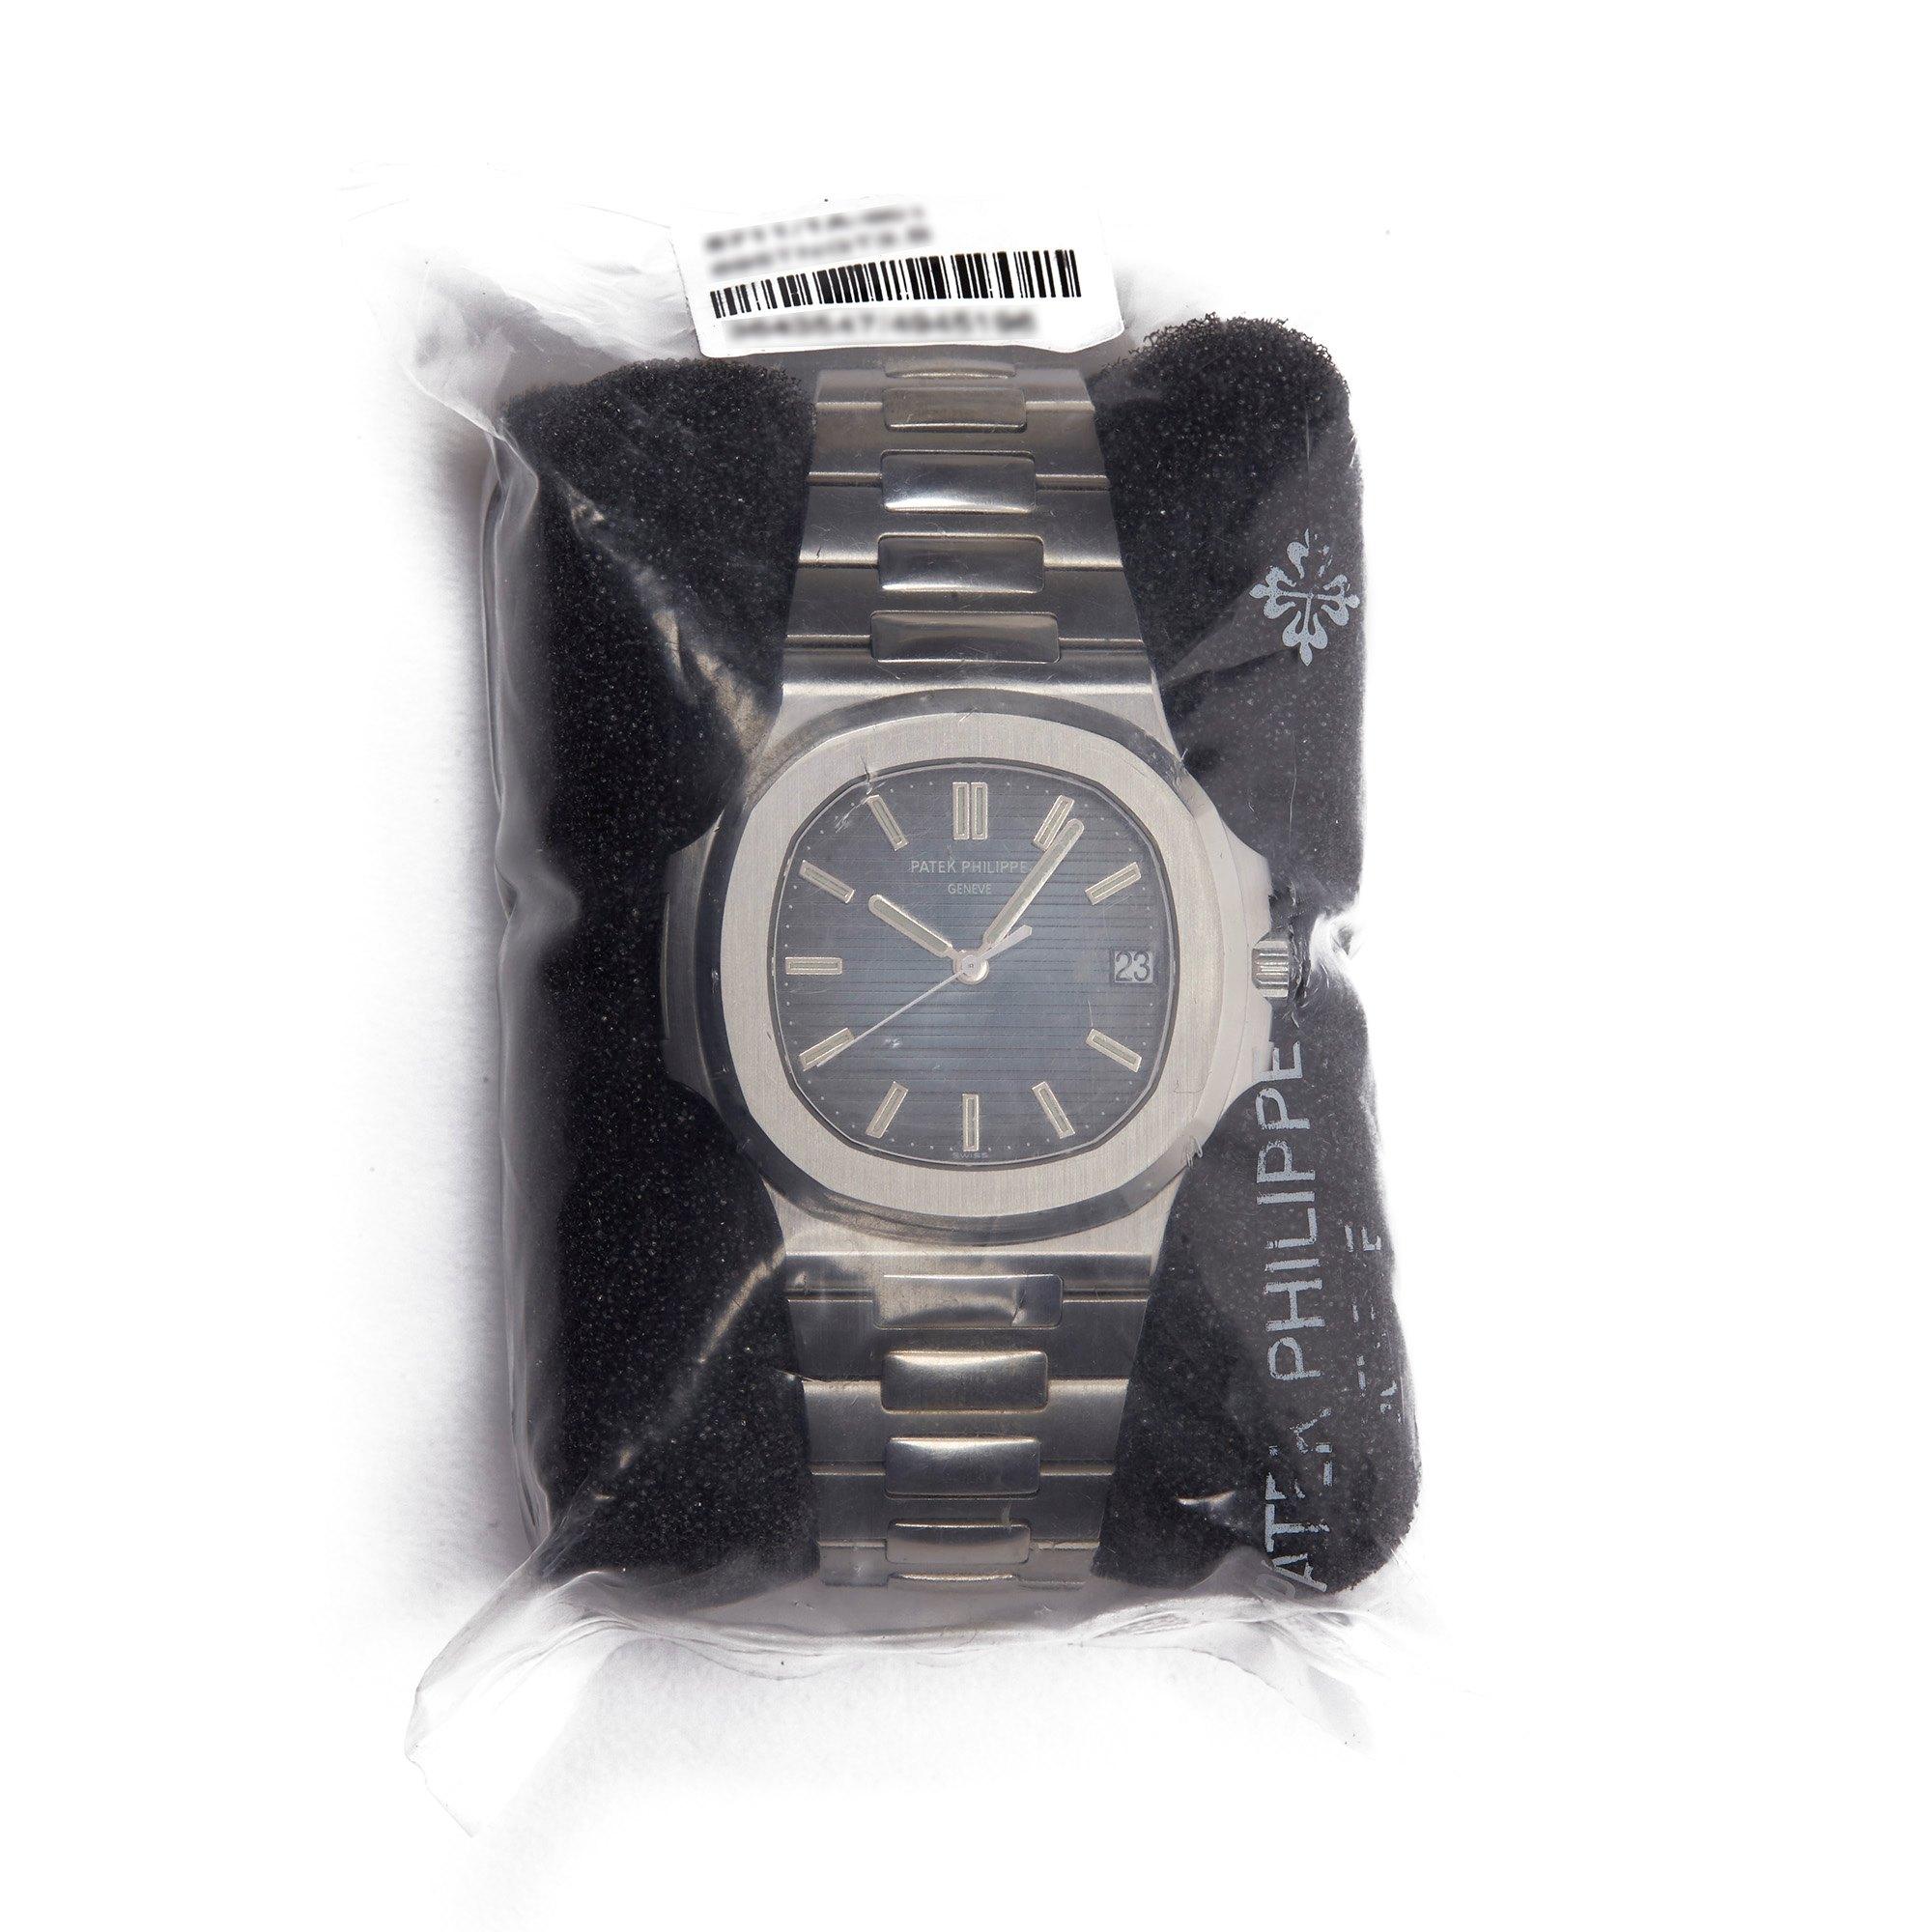 Xupes Reference: COM002419
Manufacturer: Patek Philippe
Model: Nautilus
Model Variant: 
Model Number: 5711/1A-001
Age: 11-10-2009
Gender: Men's
Complete With: Patek Philippe Box, Manuals, Guarantee & Sales Literature
Dial: Blue Baton
Glass: Sapphire